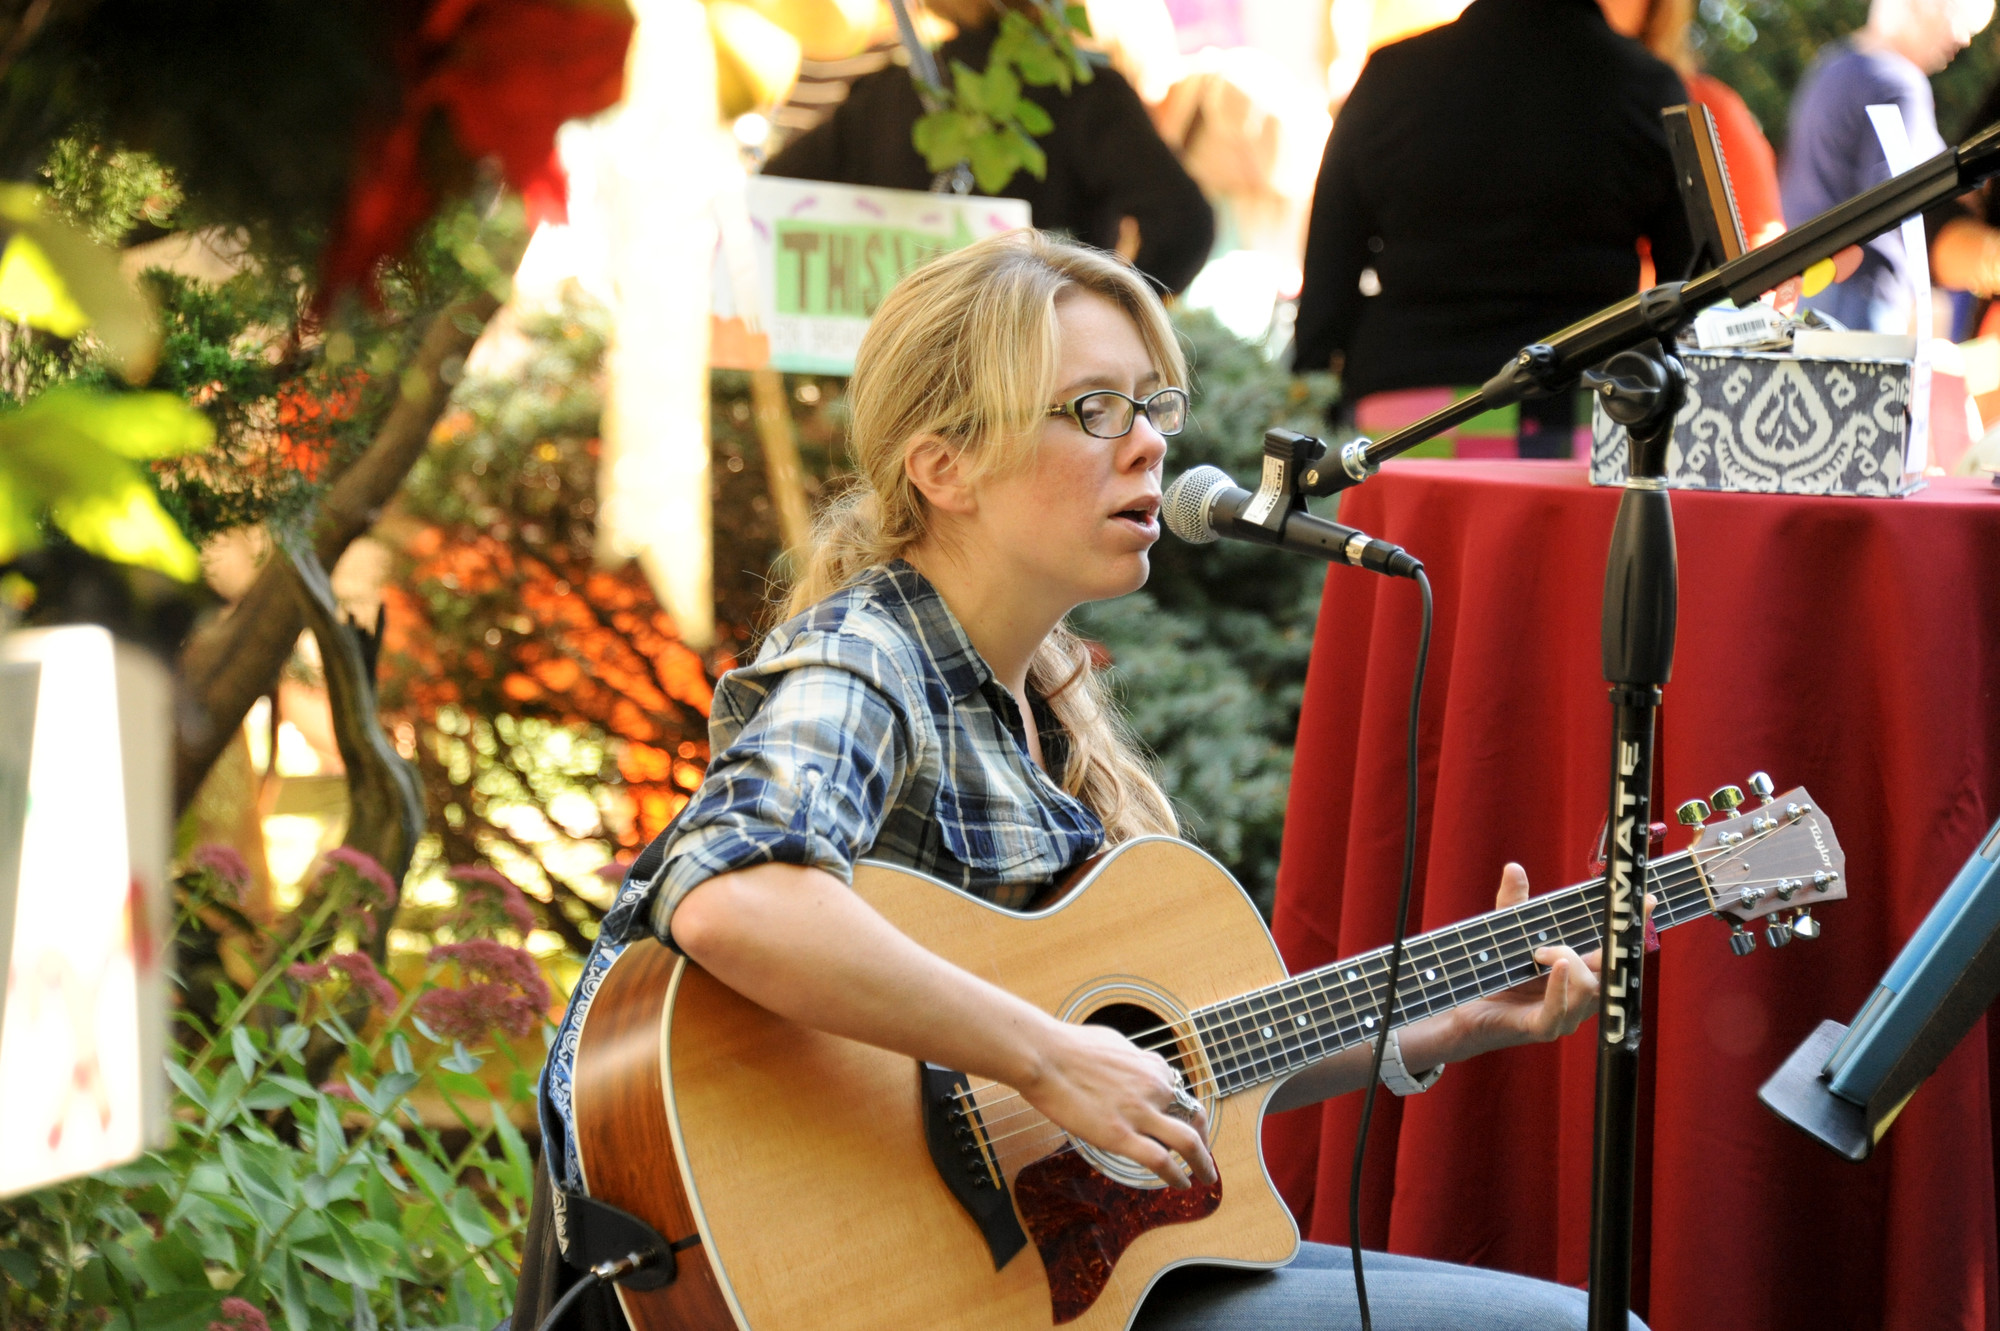 Nico Padden entertained the crowd with her music.